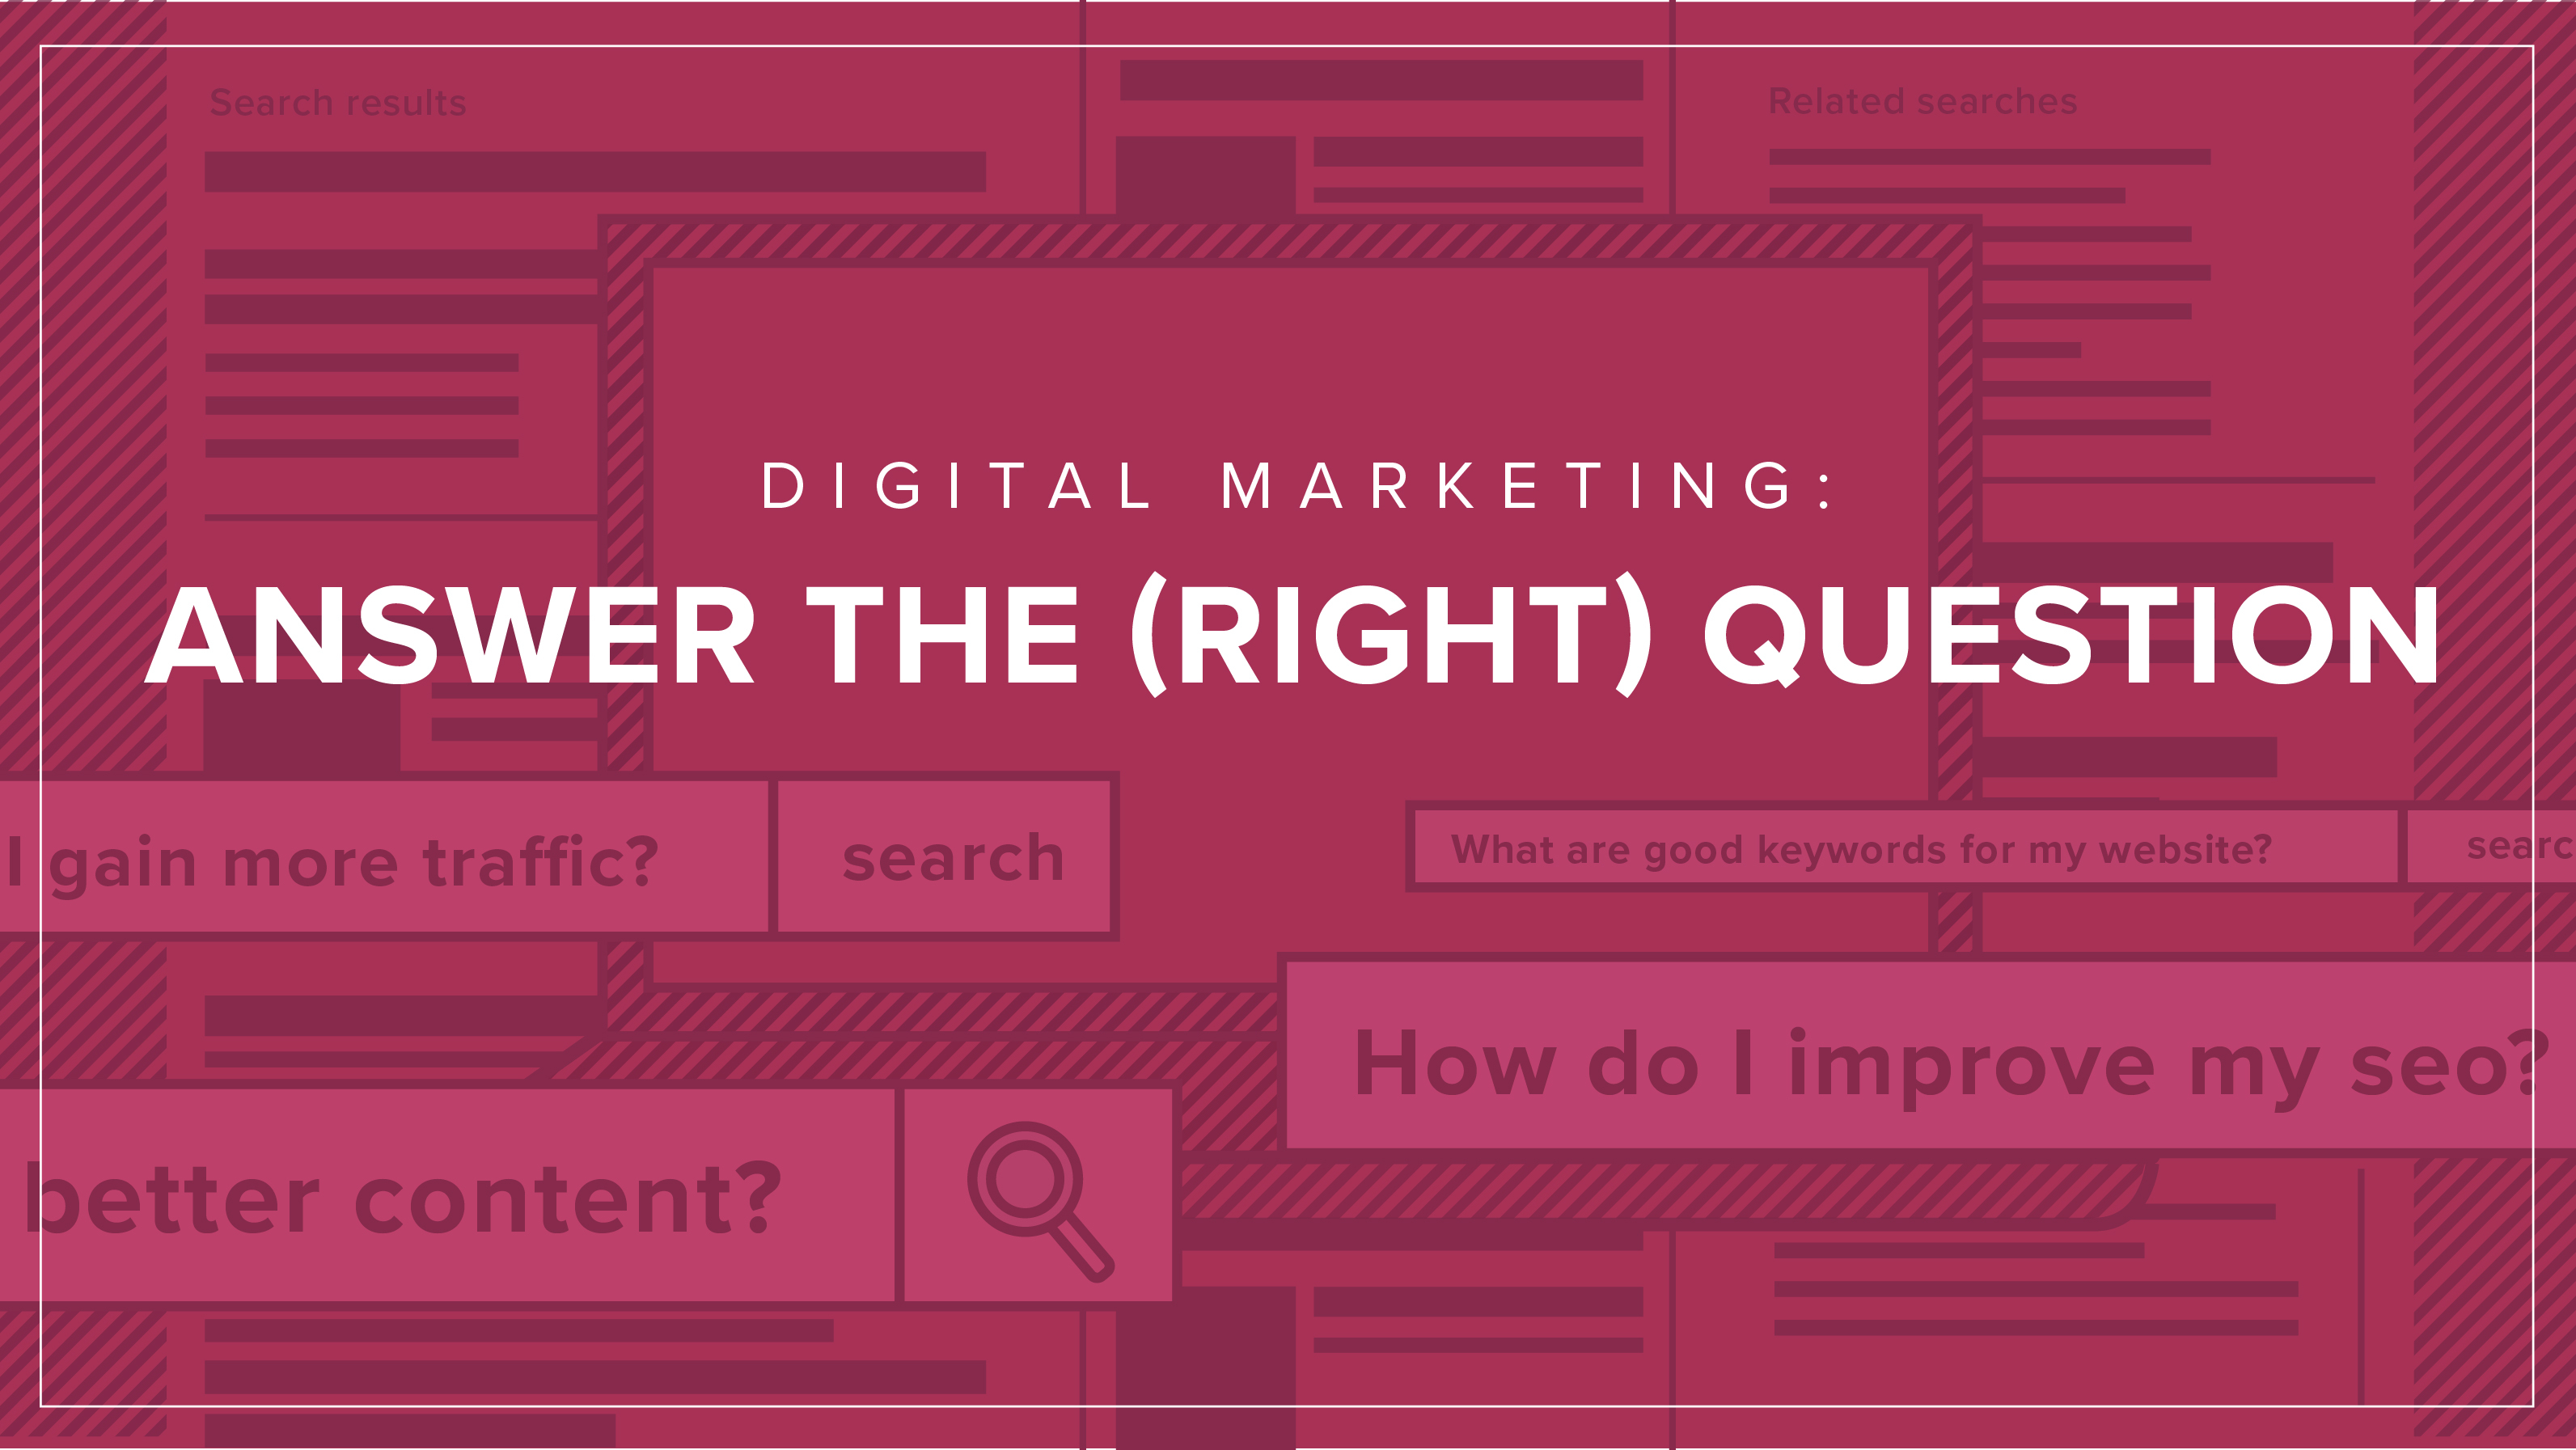 SEO Answering the Right Question - Square 205 Website Design & Marketing Agency in Denton, Texas